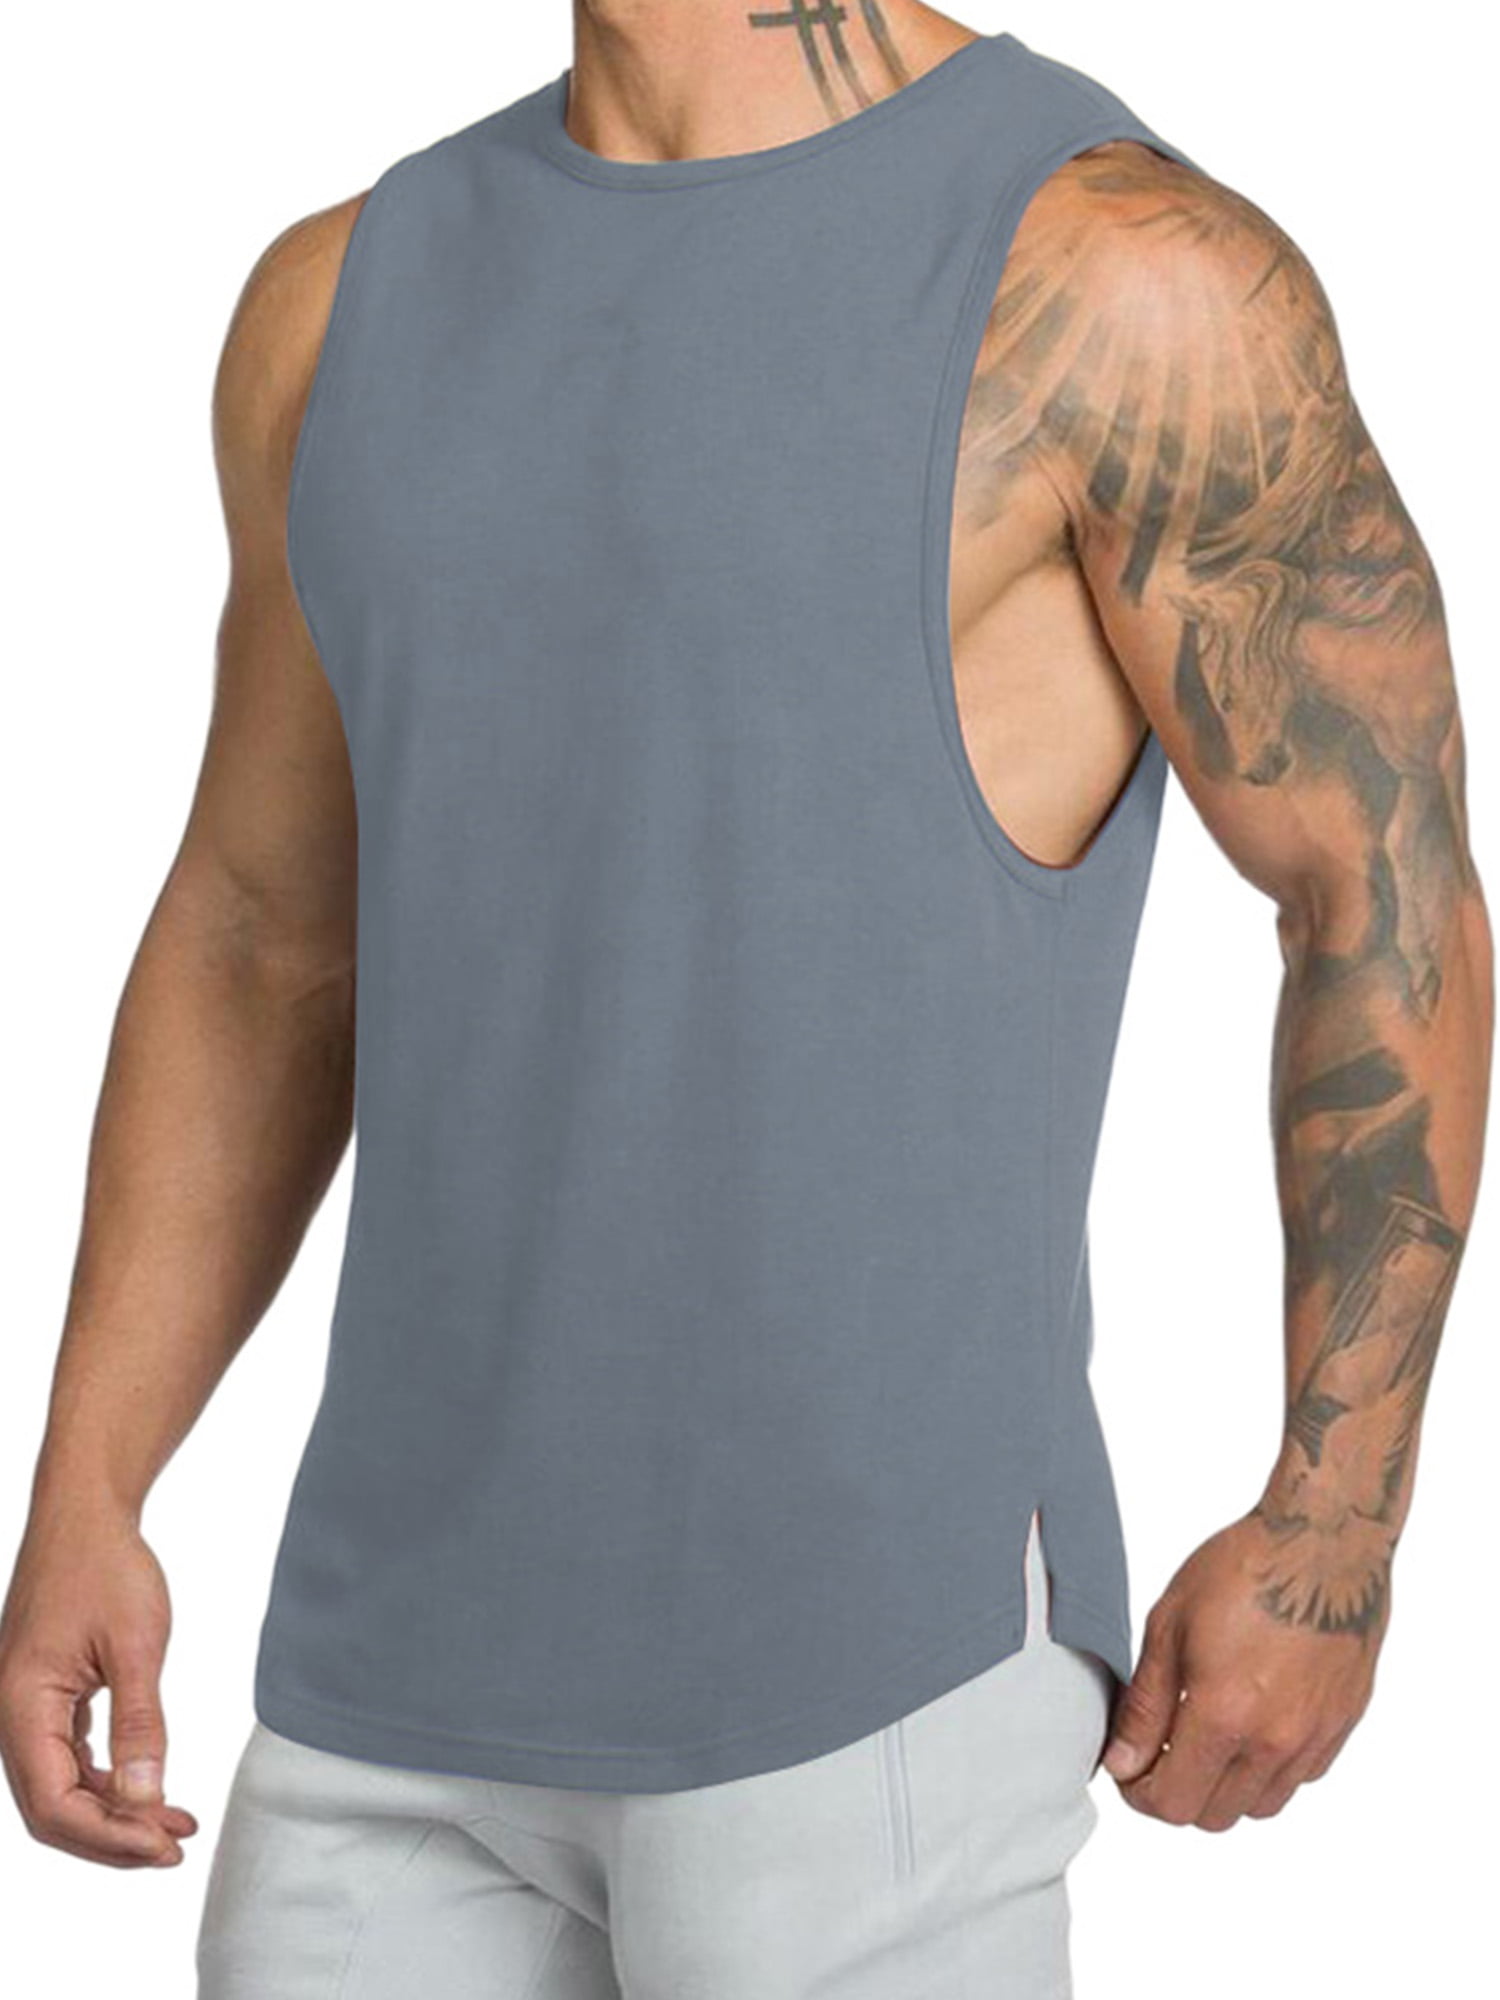 Mens Premium Basic Casual Athletic Sport Jersey Tank Tops Tshirts Work Out Gym